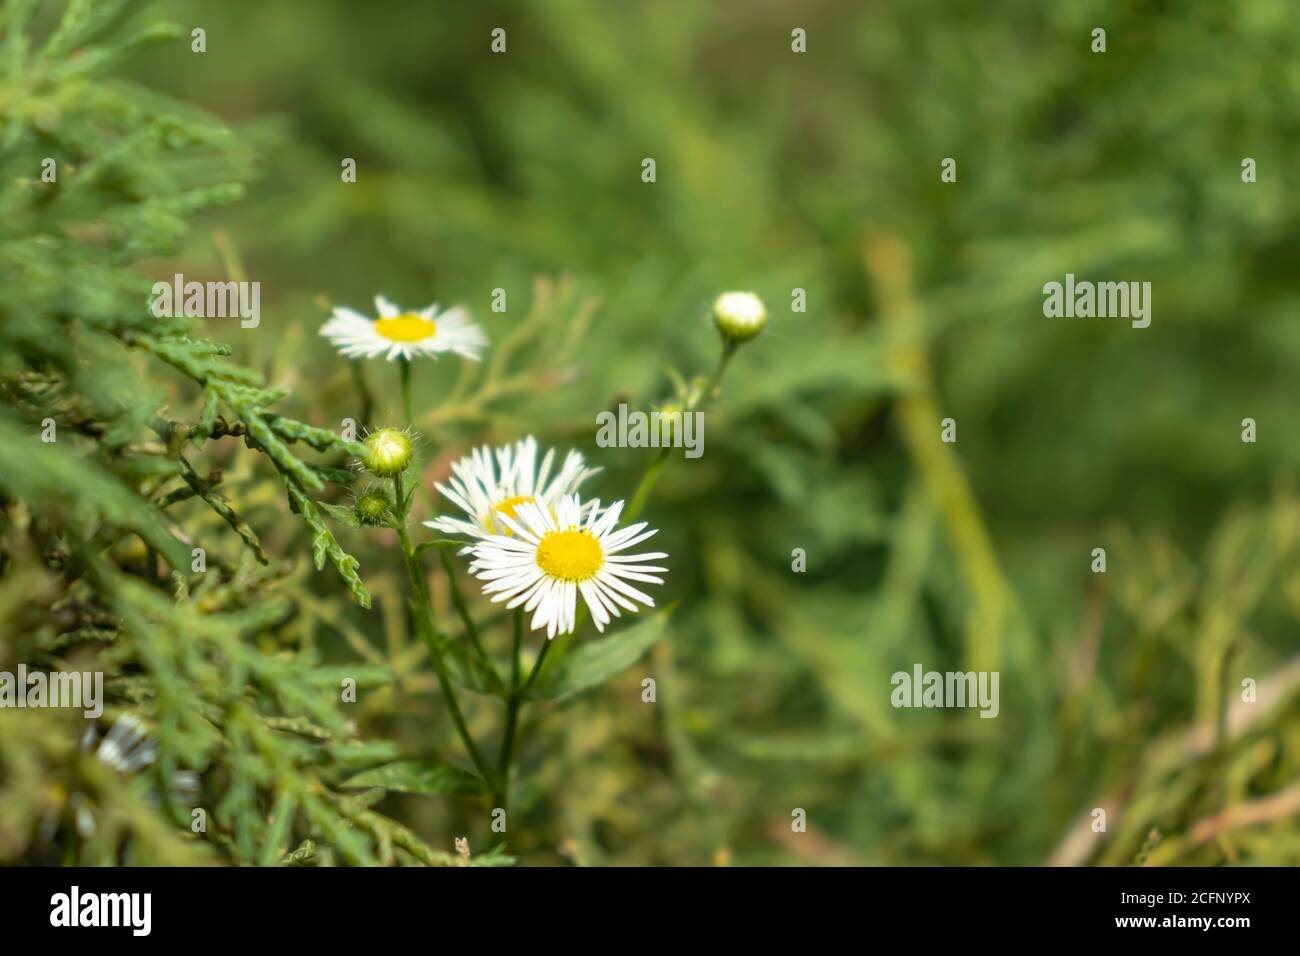 Camomile flower white in the garden. Beatiful and bright camomile blossom. Stock Photo